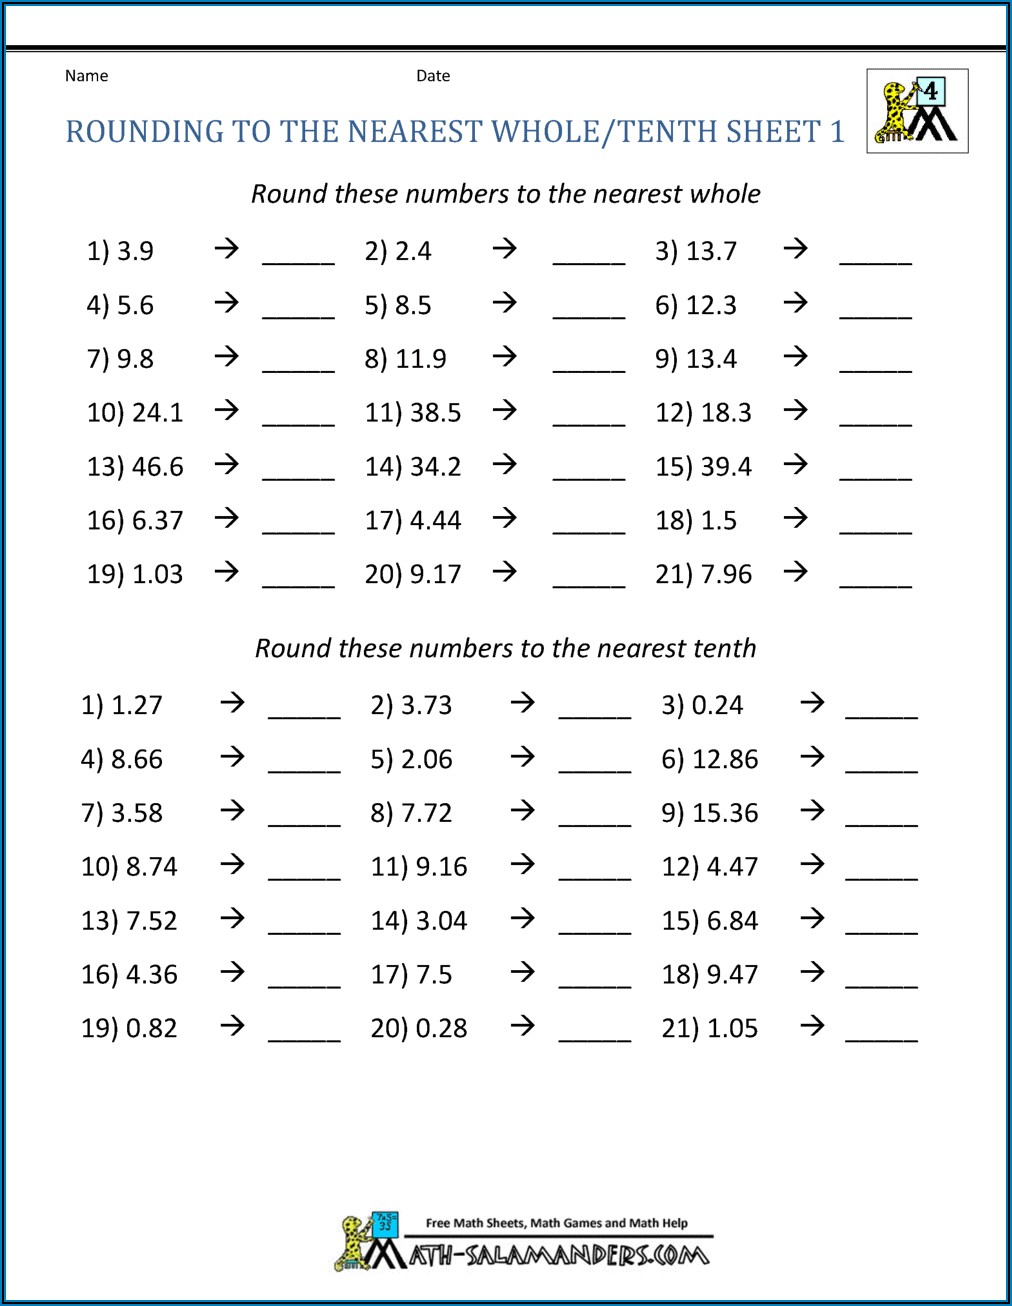 Rounding Numbers To The Nearest 10 Worksheet Pdf